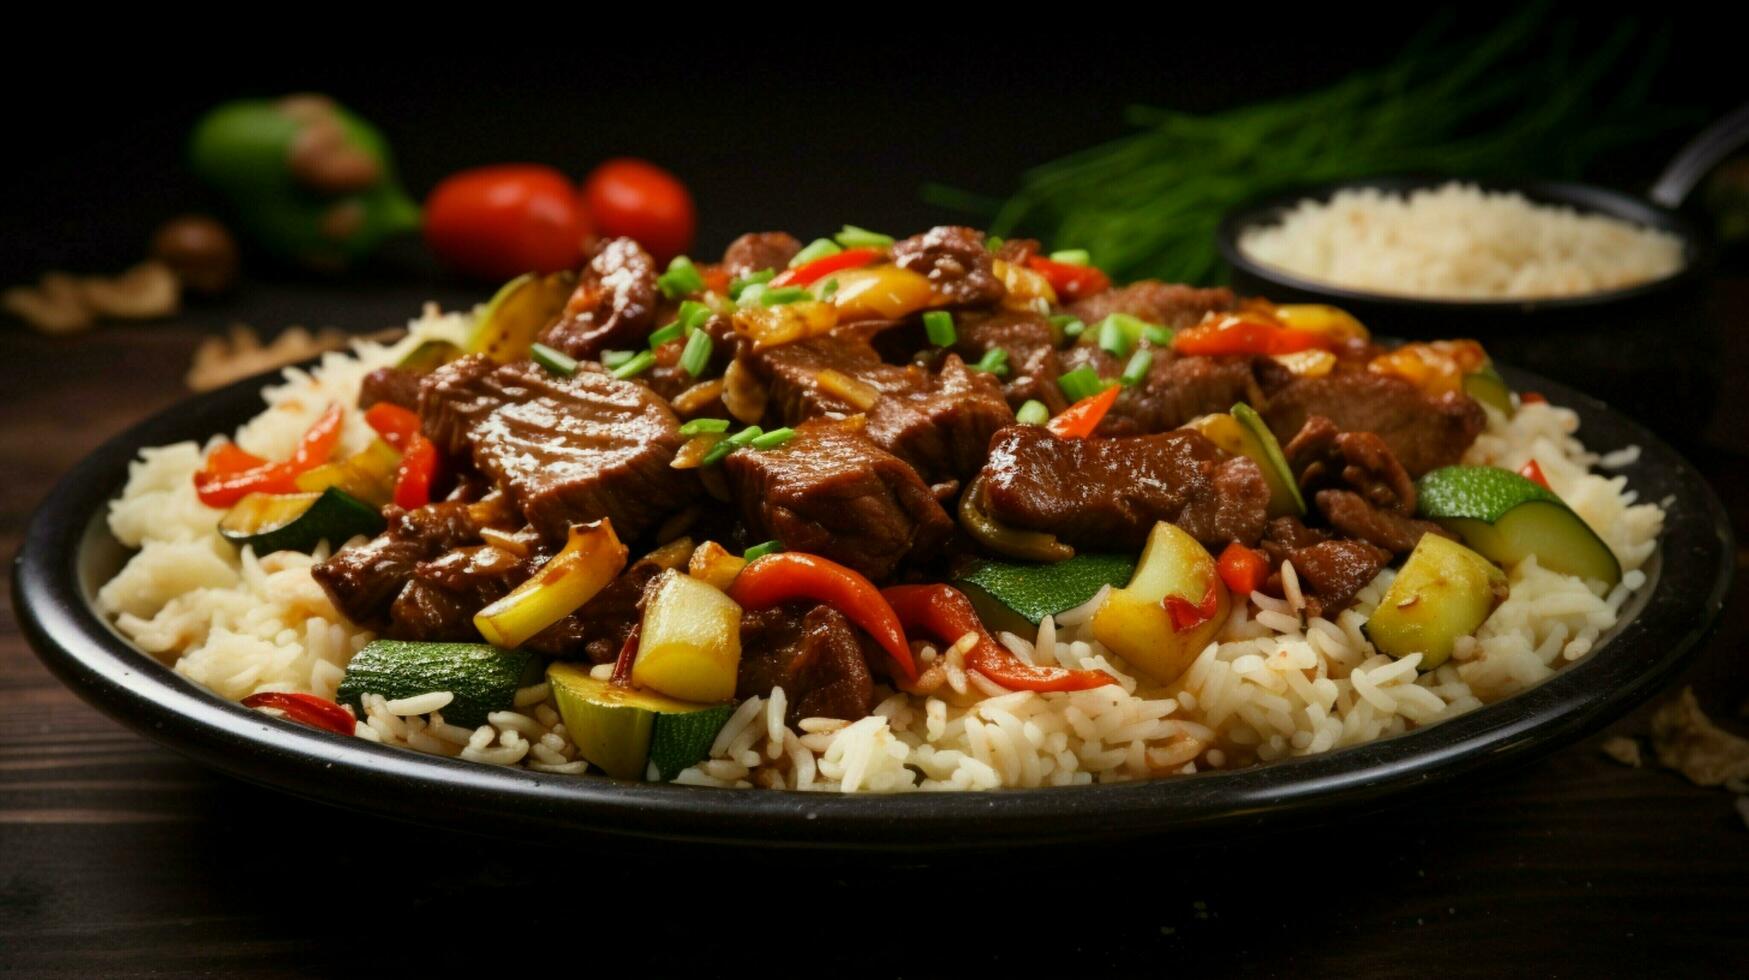 healthy meal with beef rice and vegetables photo